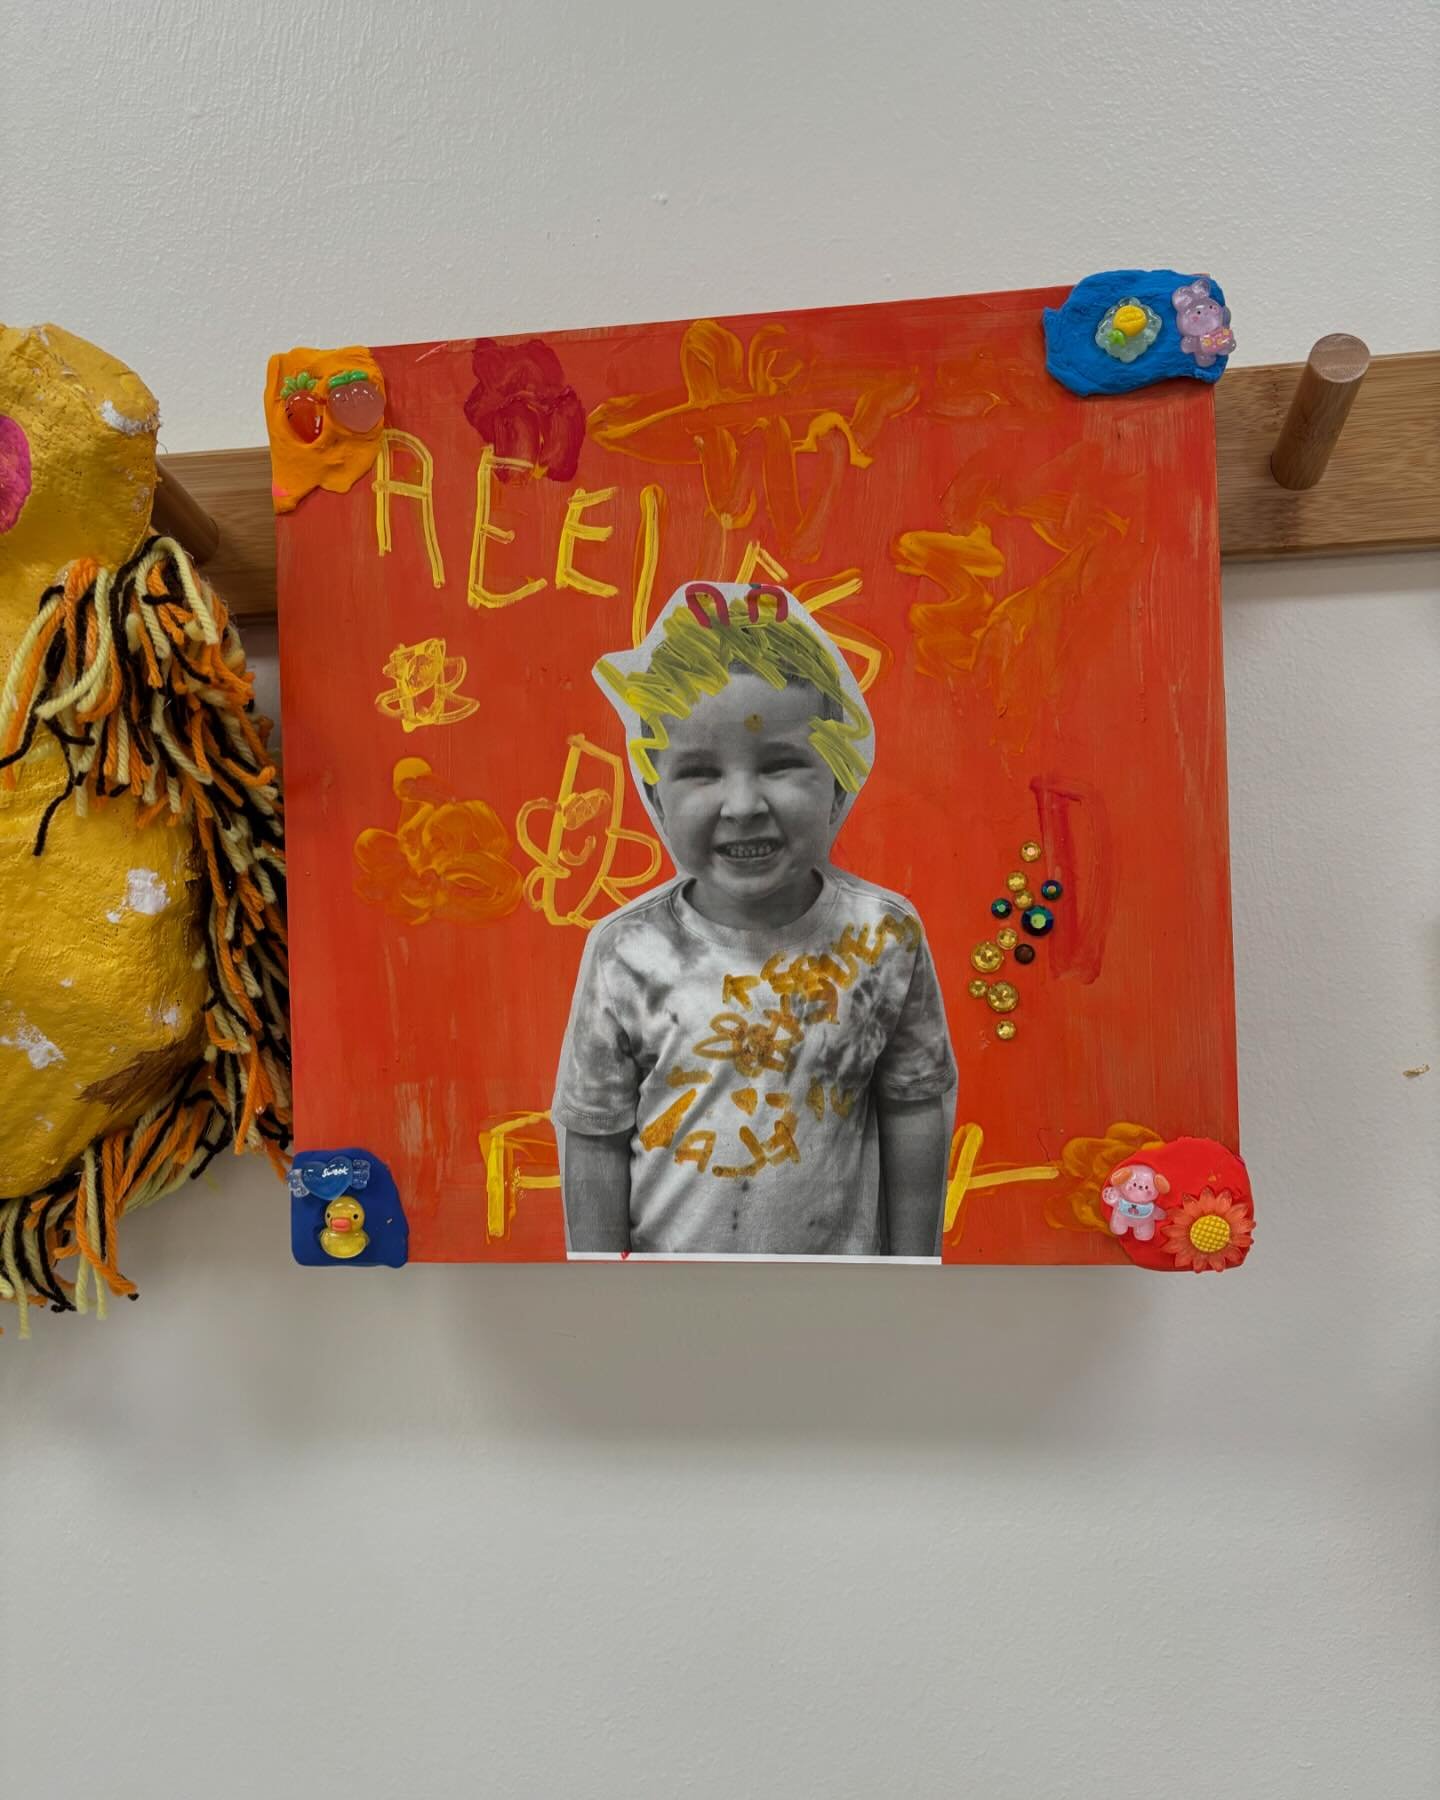 A very ✨EXTRA✨ self-portrait project in Afterschool Creative Crew. 
A family donated these really nice wooden art boards so we had to make something extra special of course! We used paint, poscas, gems, air dry clay and charms for these beauties!

#p